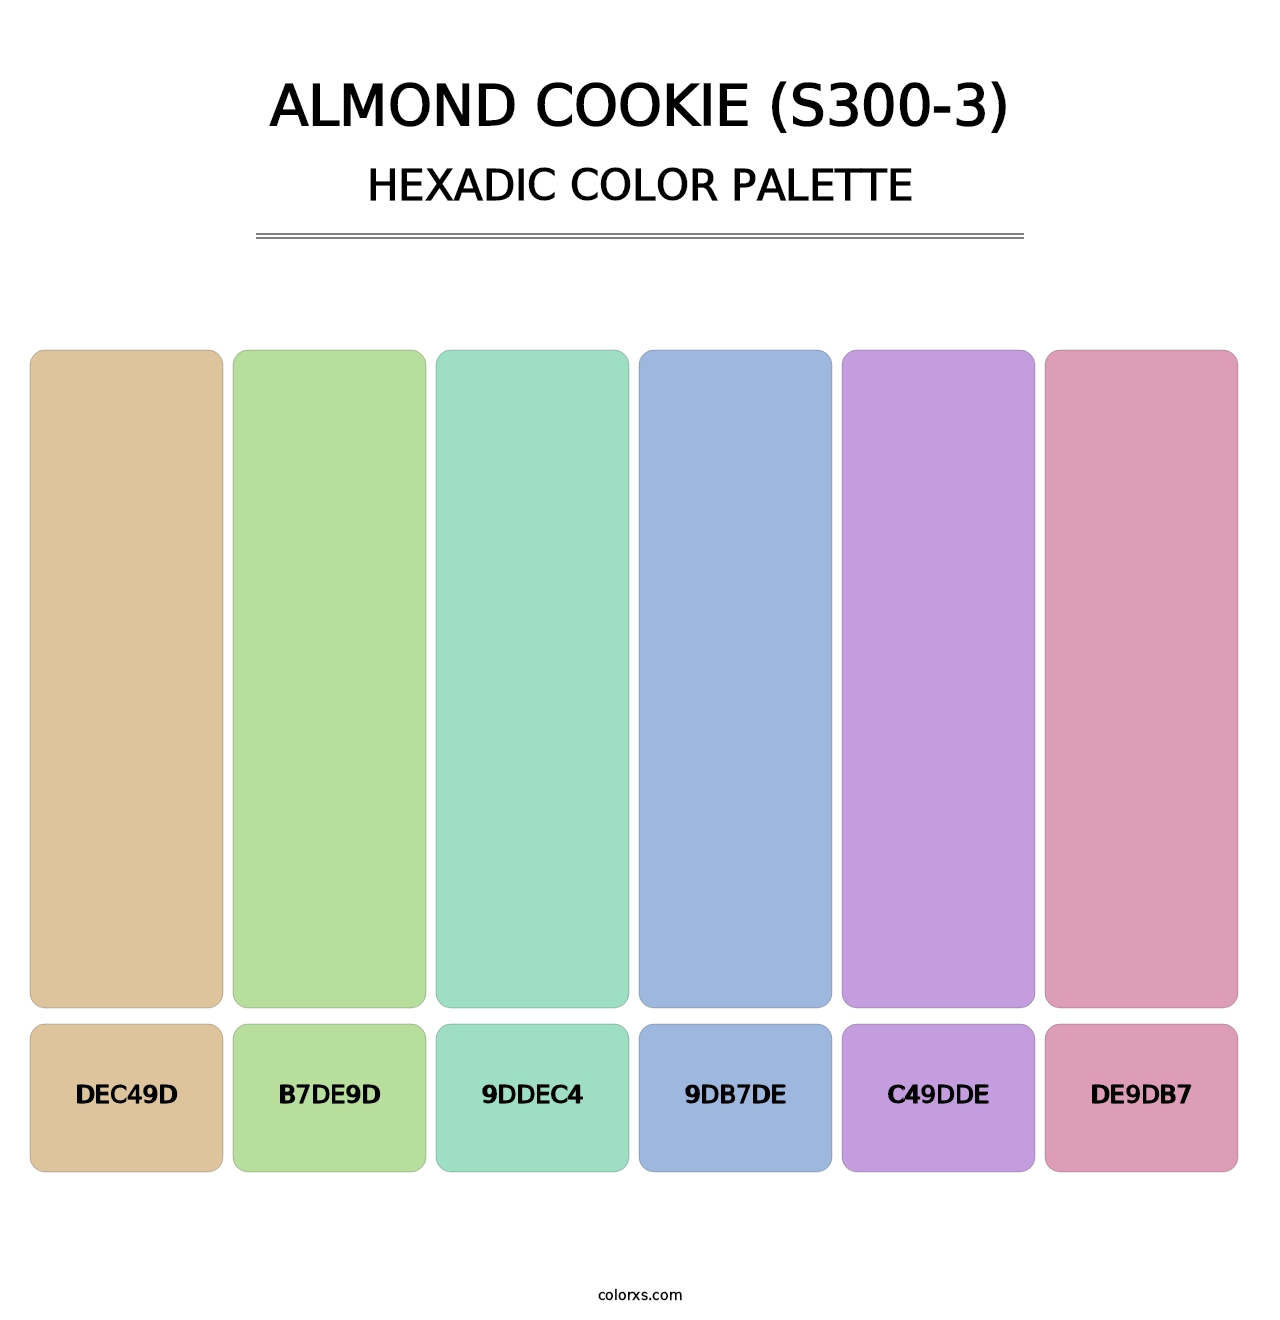 Almond Cookie (S300-3) - Hexadic Color Palette